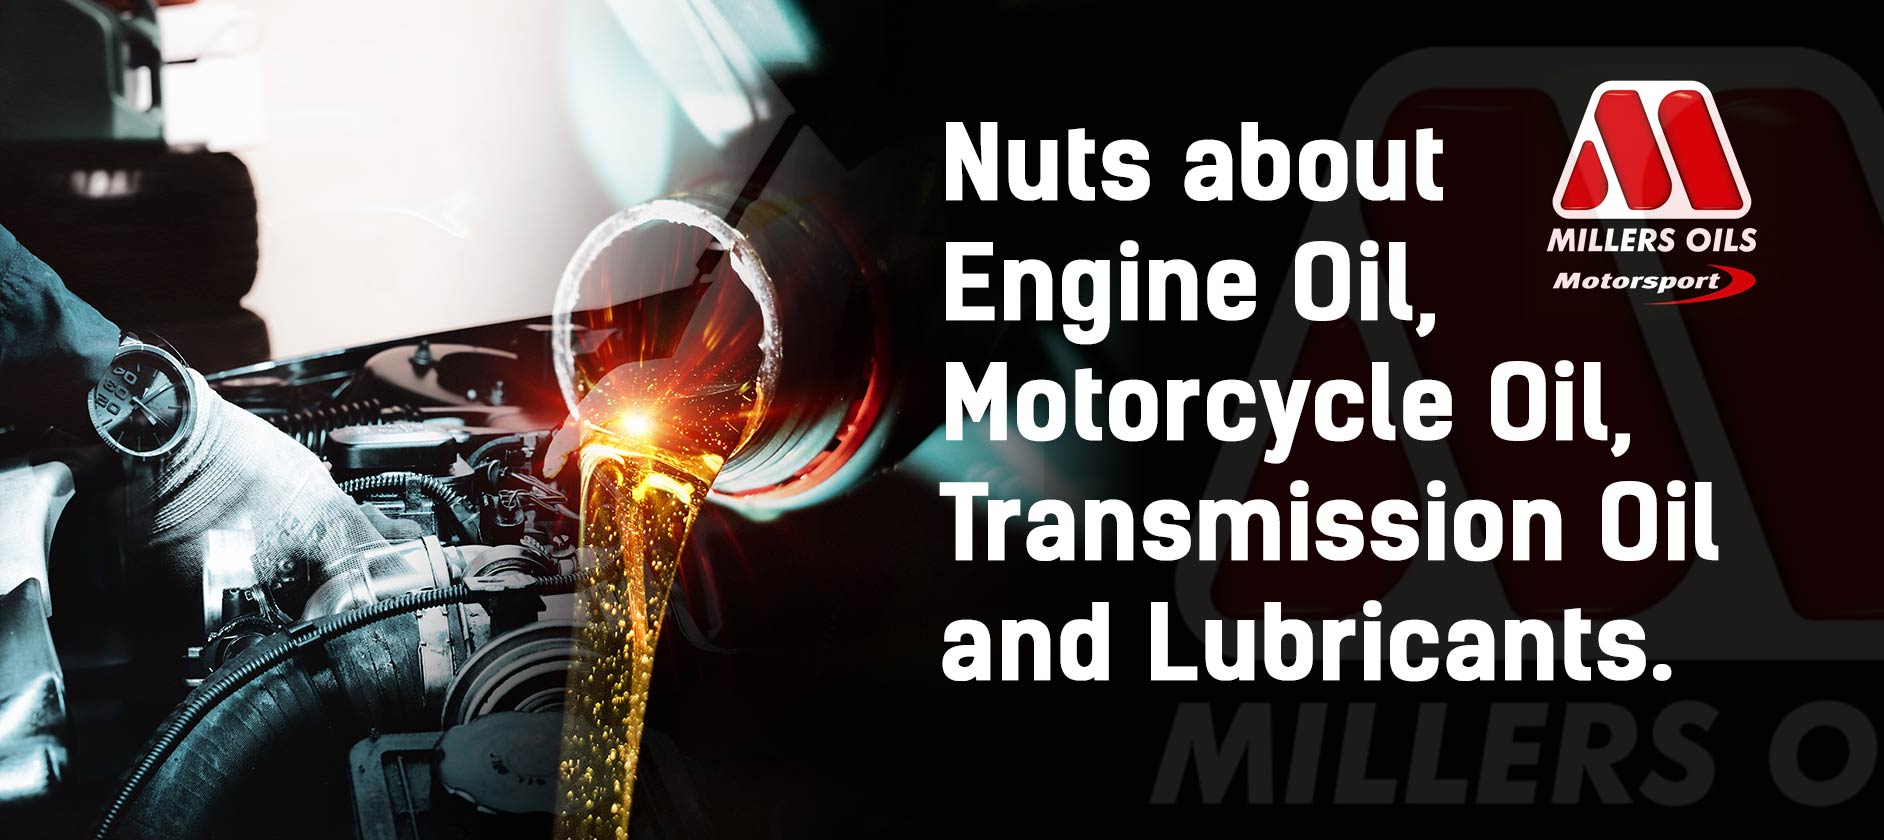 Nuts about Engine Oil, Motorcycle Oil, Transmission Oil and Lubricants.